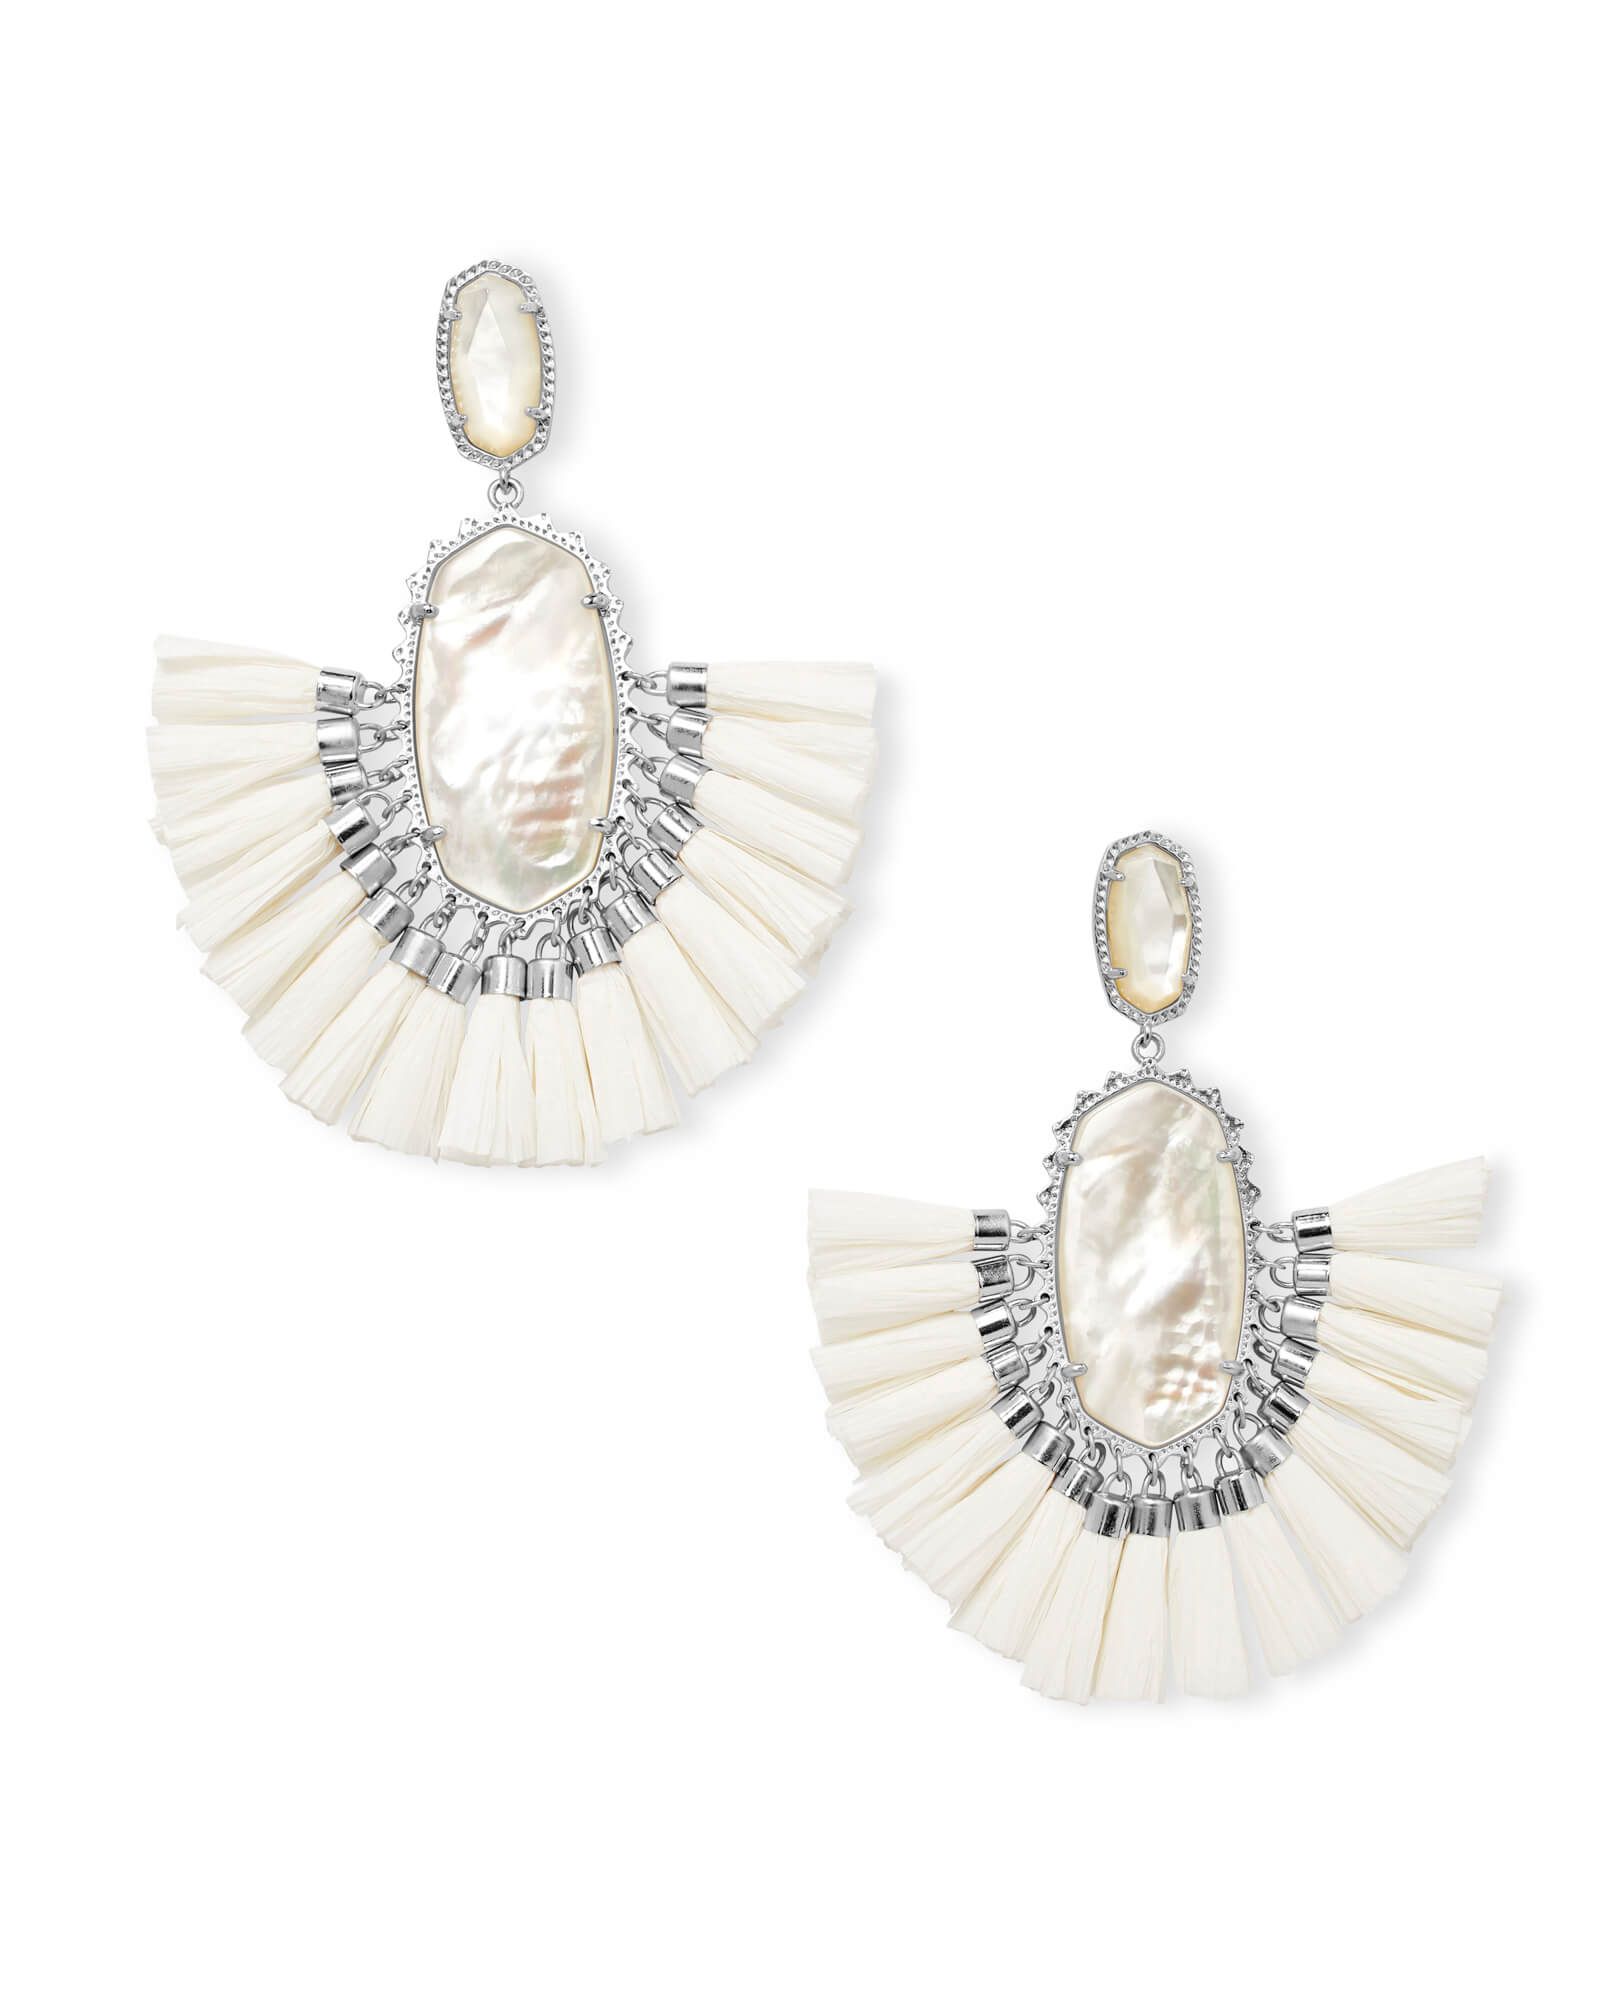 Cristina Silver Statement Earrings In Ivory Mother of Pearl | Kendra Scott